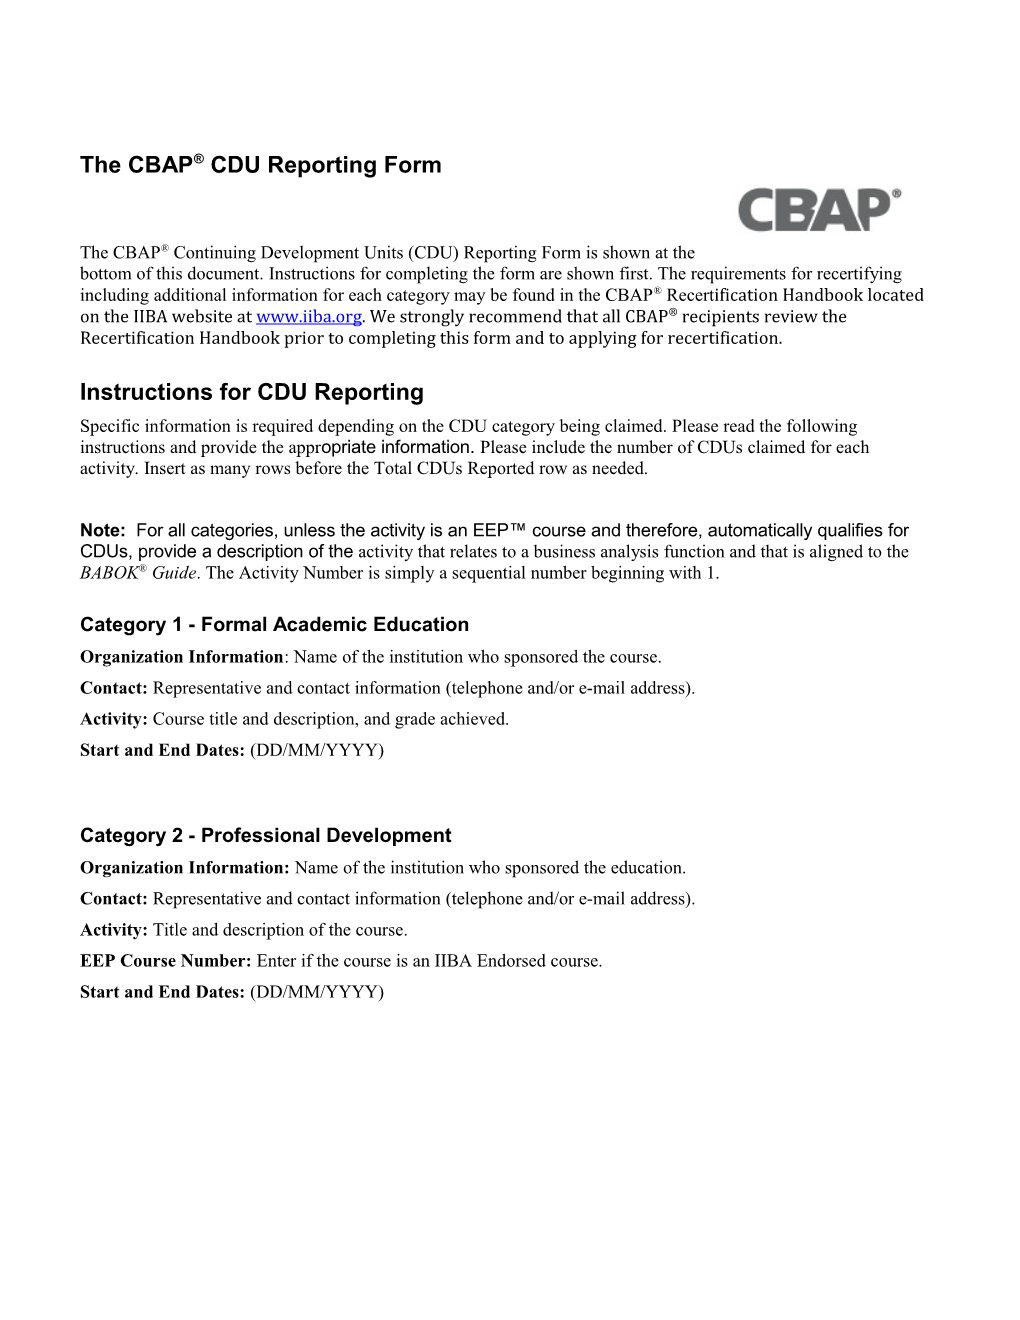 The CBAP CDU Reporting Form